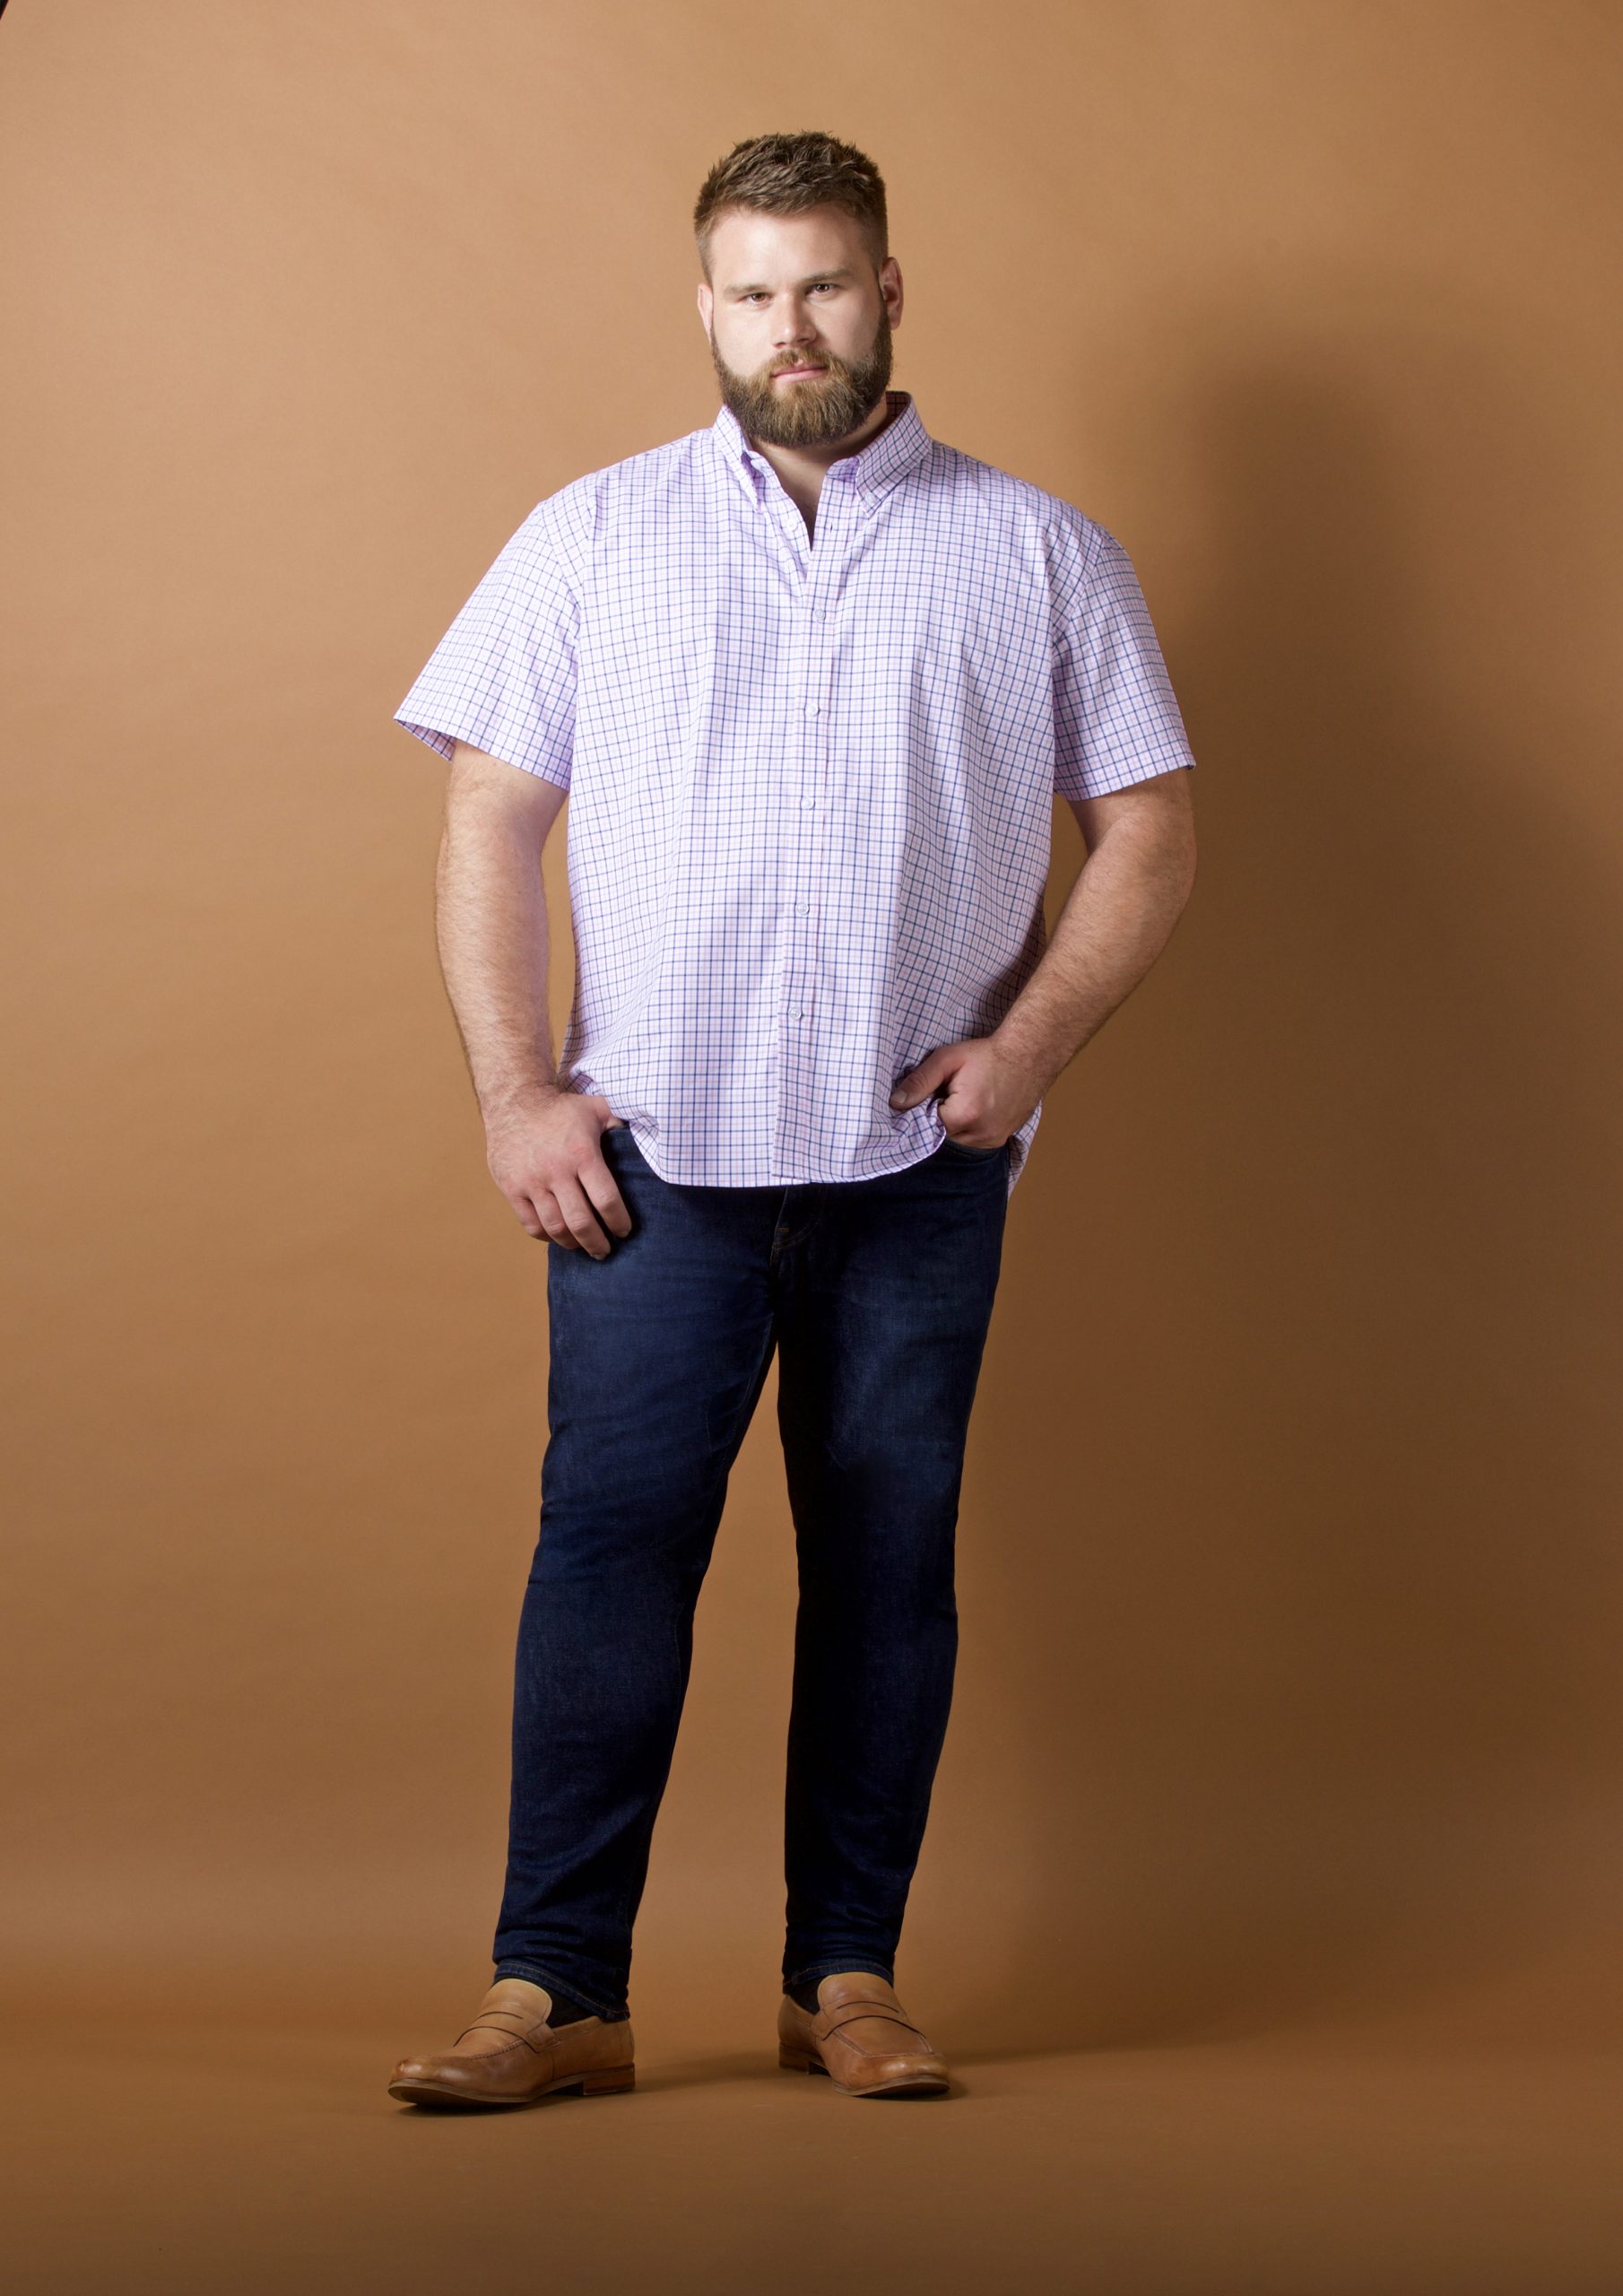 Combat Gent Expands Into Big and Tall With Thorn & Co. Line | Chubstr